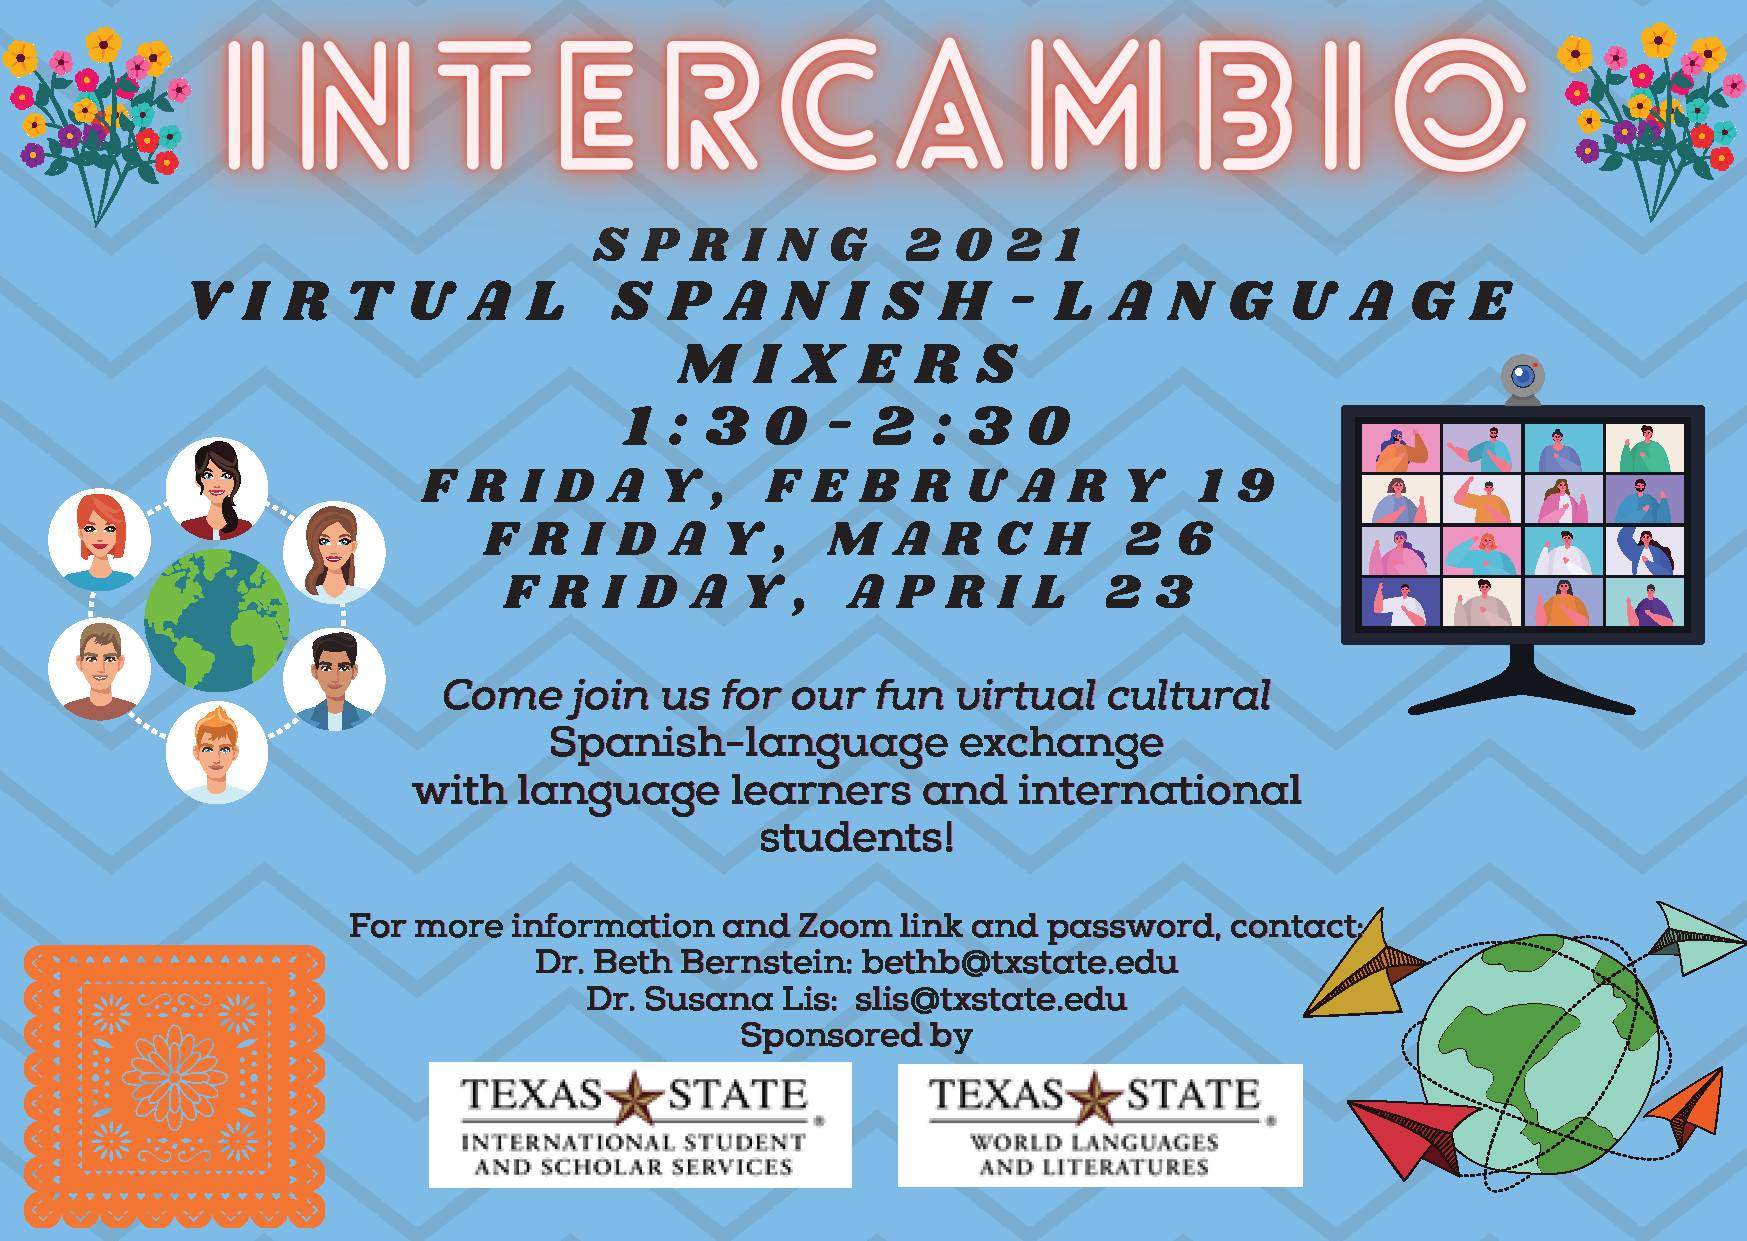 spring 2021 intercambios with world language and literature department. Friday, Feb 19th; Friday, March 26th; Friday, april 23rd